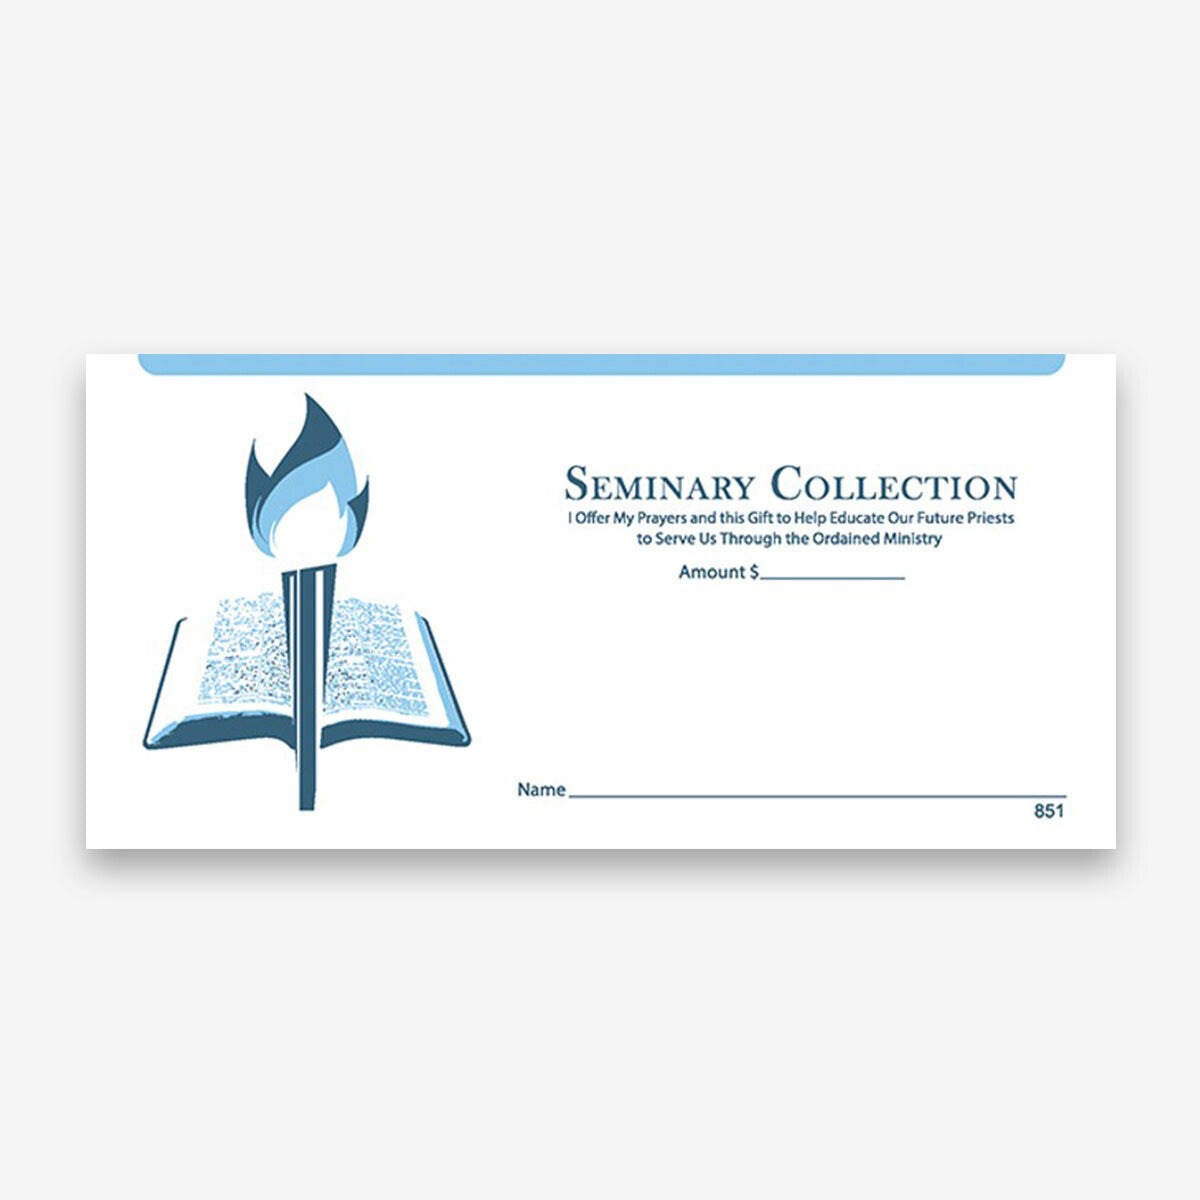 NCS National Church Solutions Seminary Offering Envelope